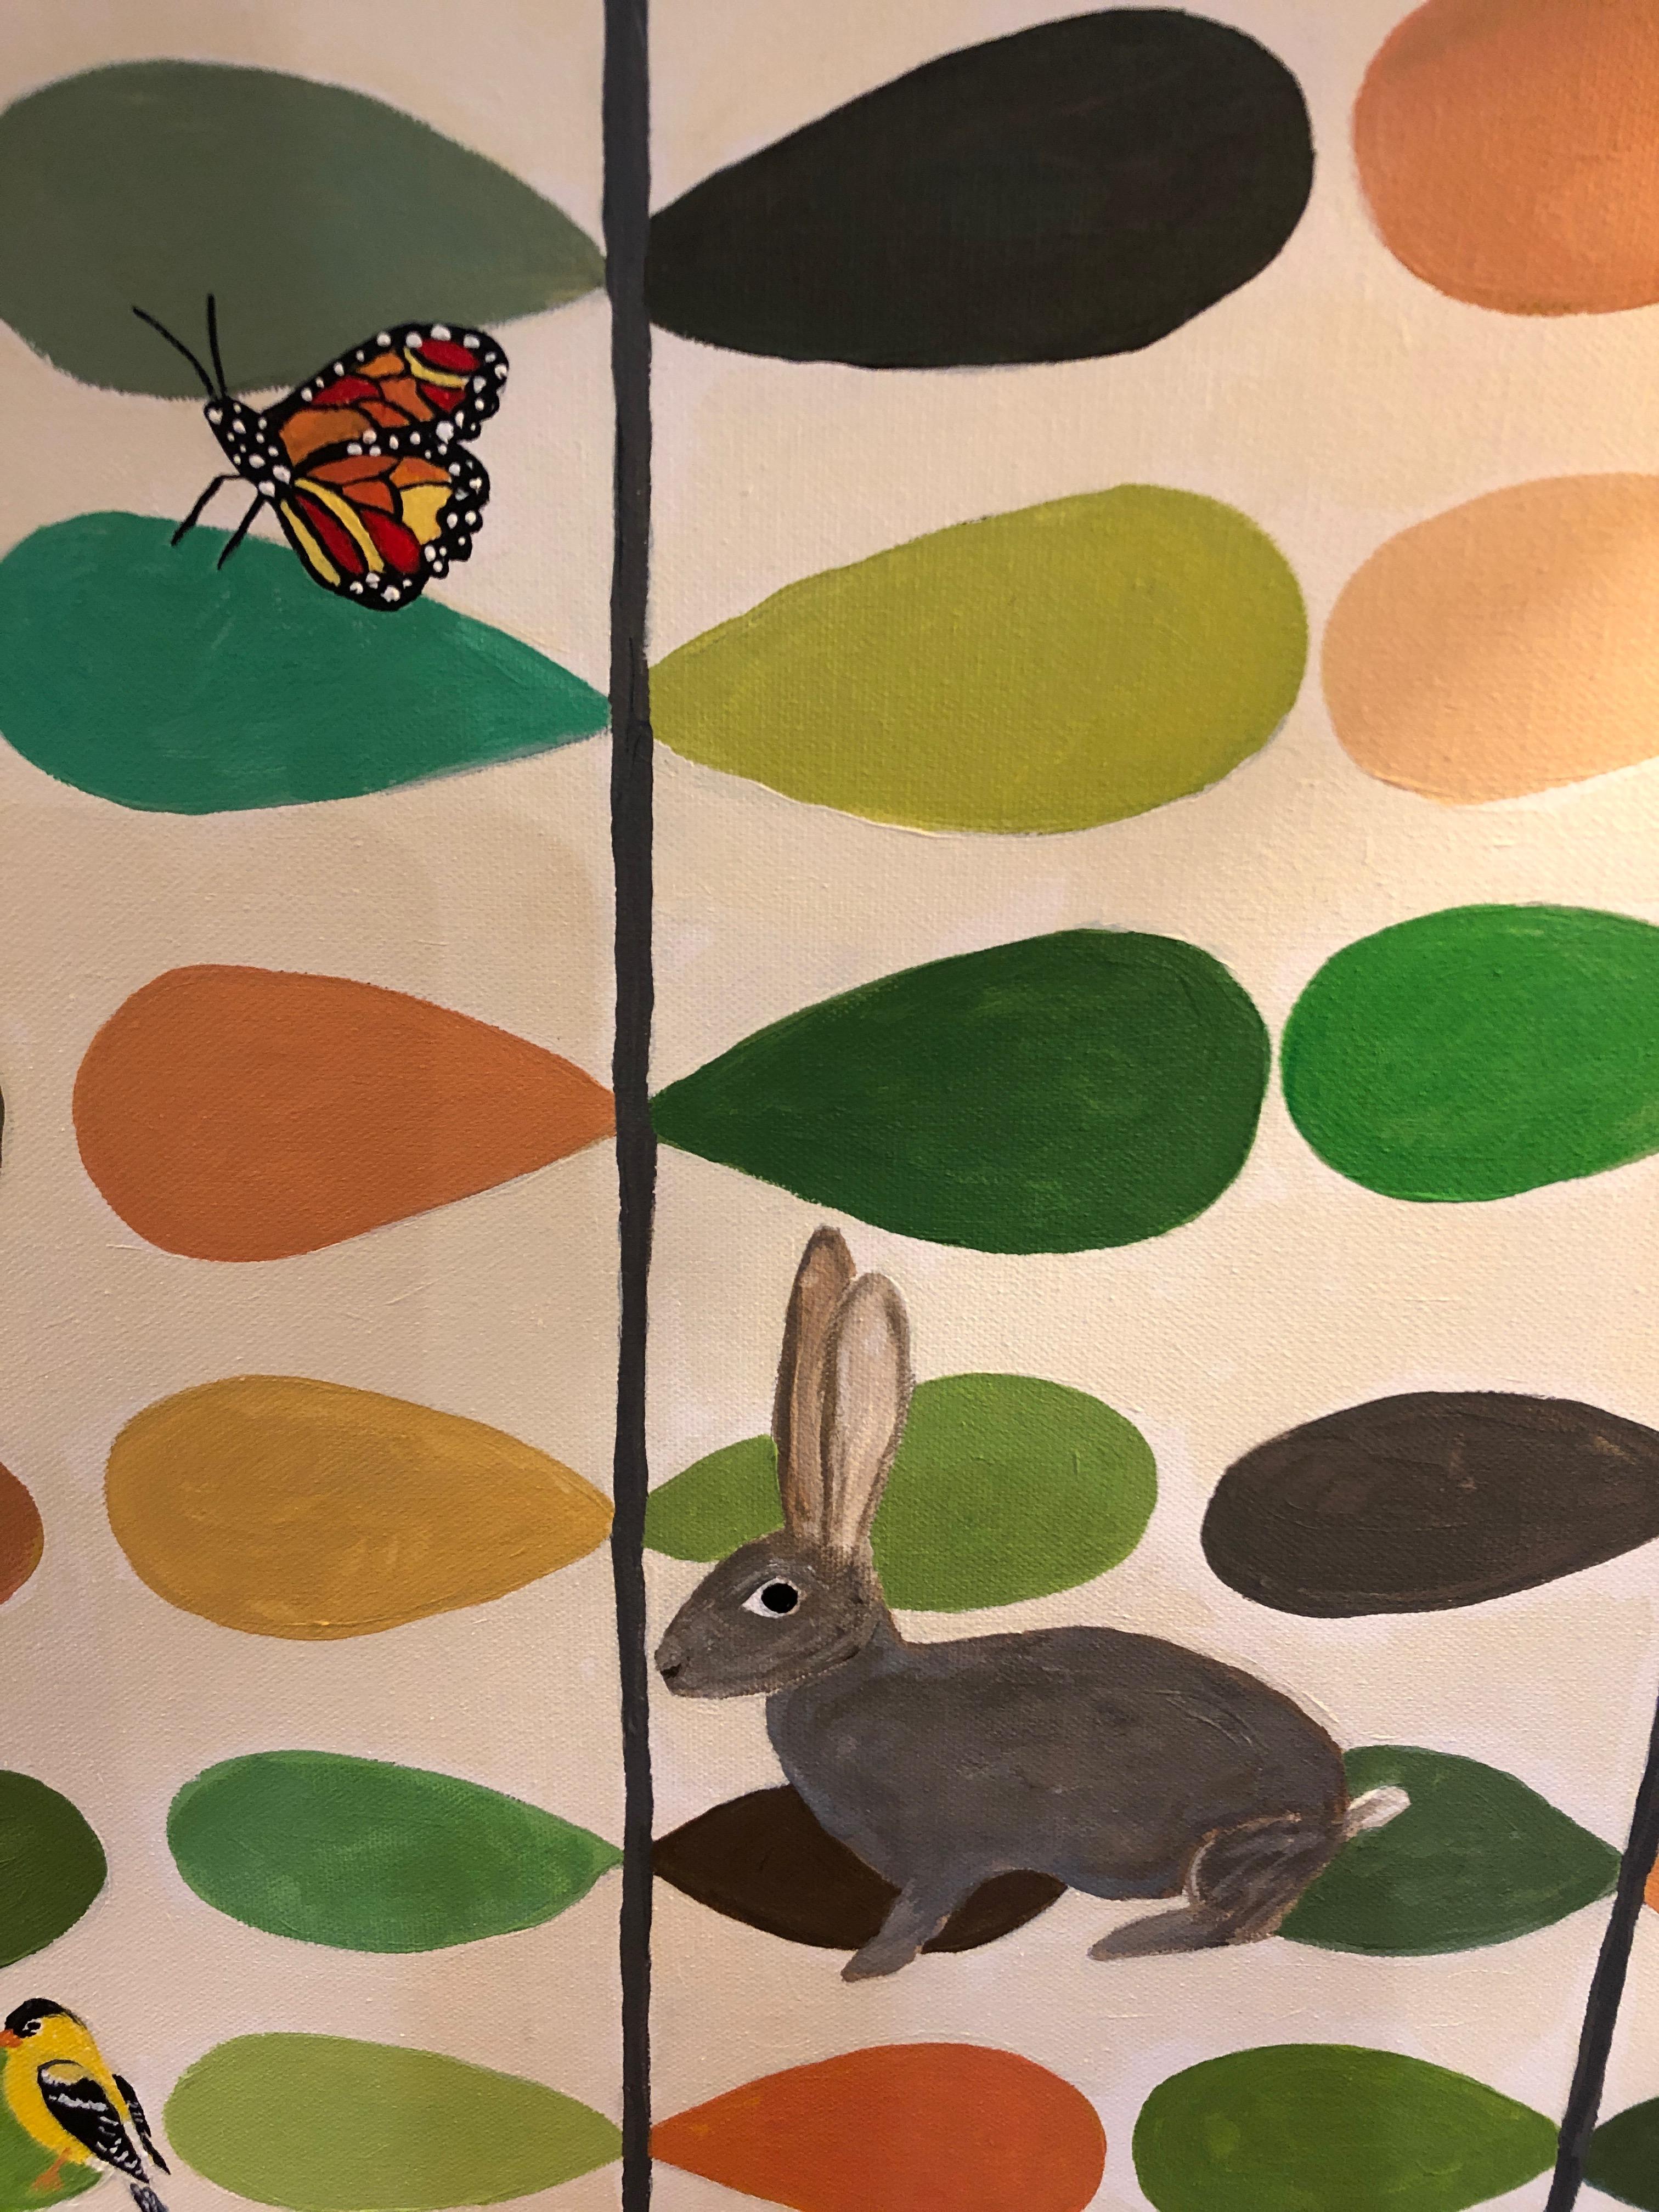 Creative rendering of a geometric fresh leafy bold background pattern with spare but powerful visitors from the artist's Summer Morning walk.
Painted around the edges so framing optional. Wired and ready to hang.